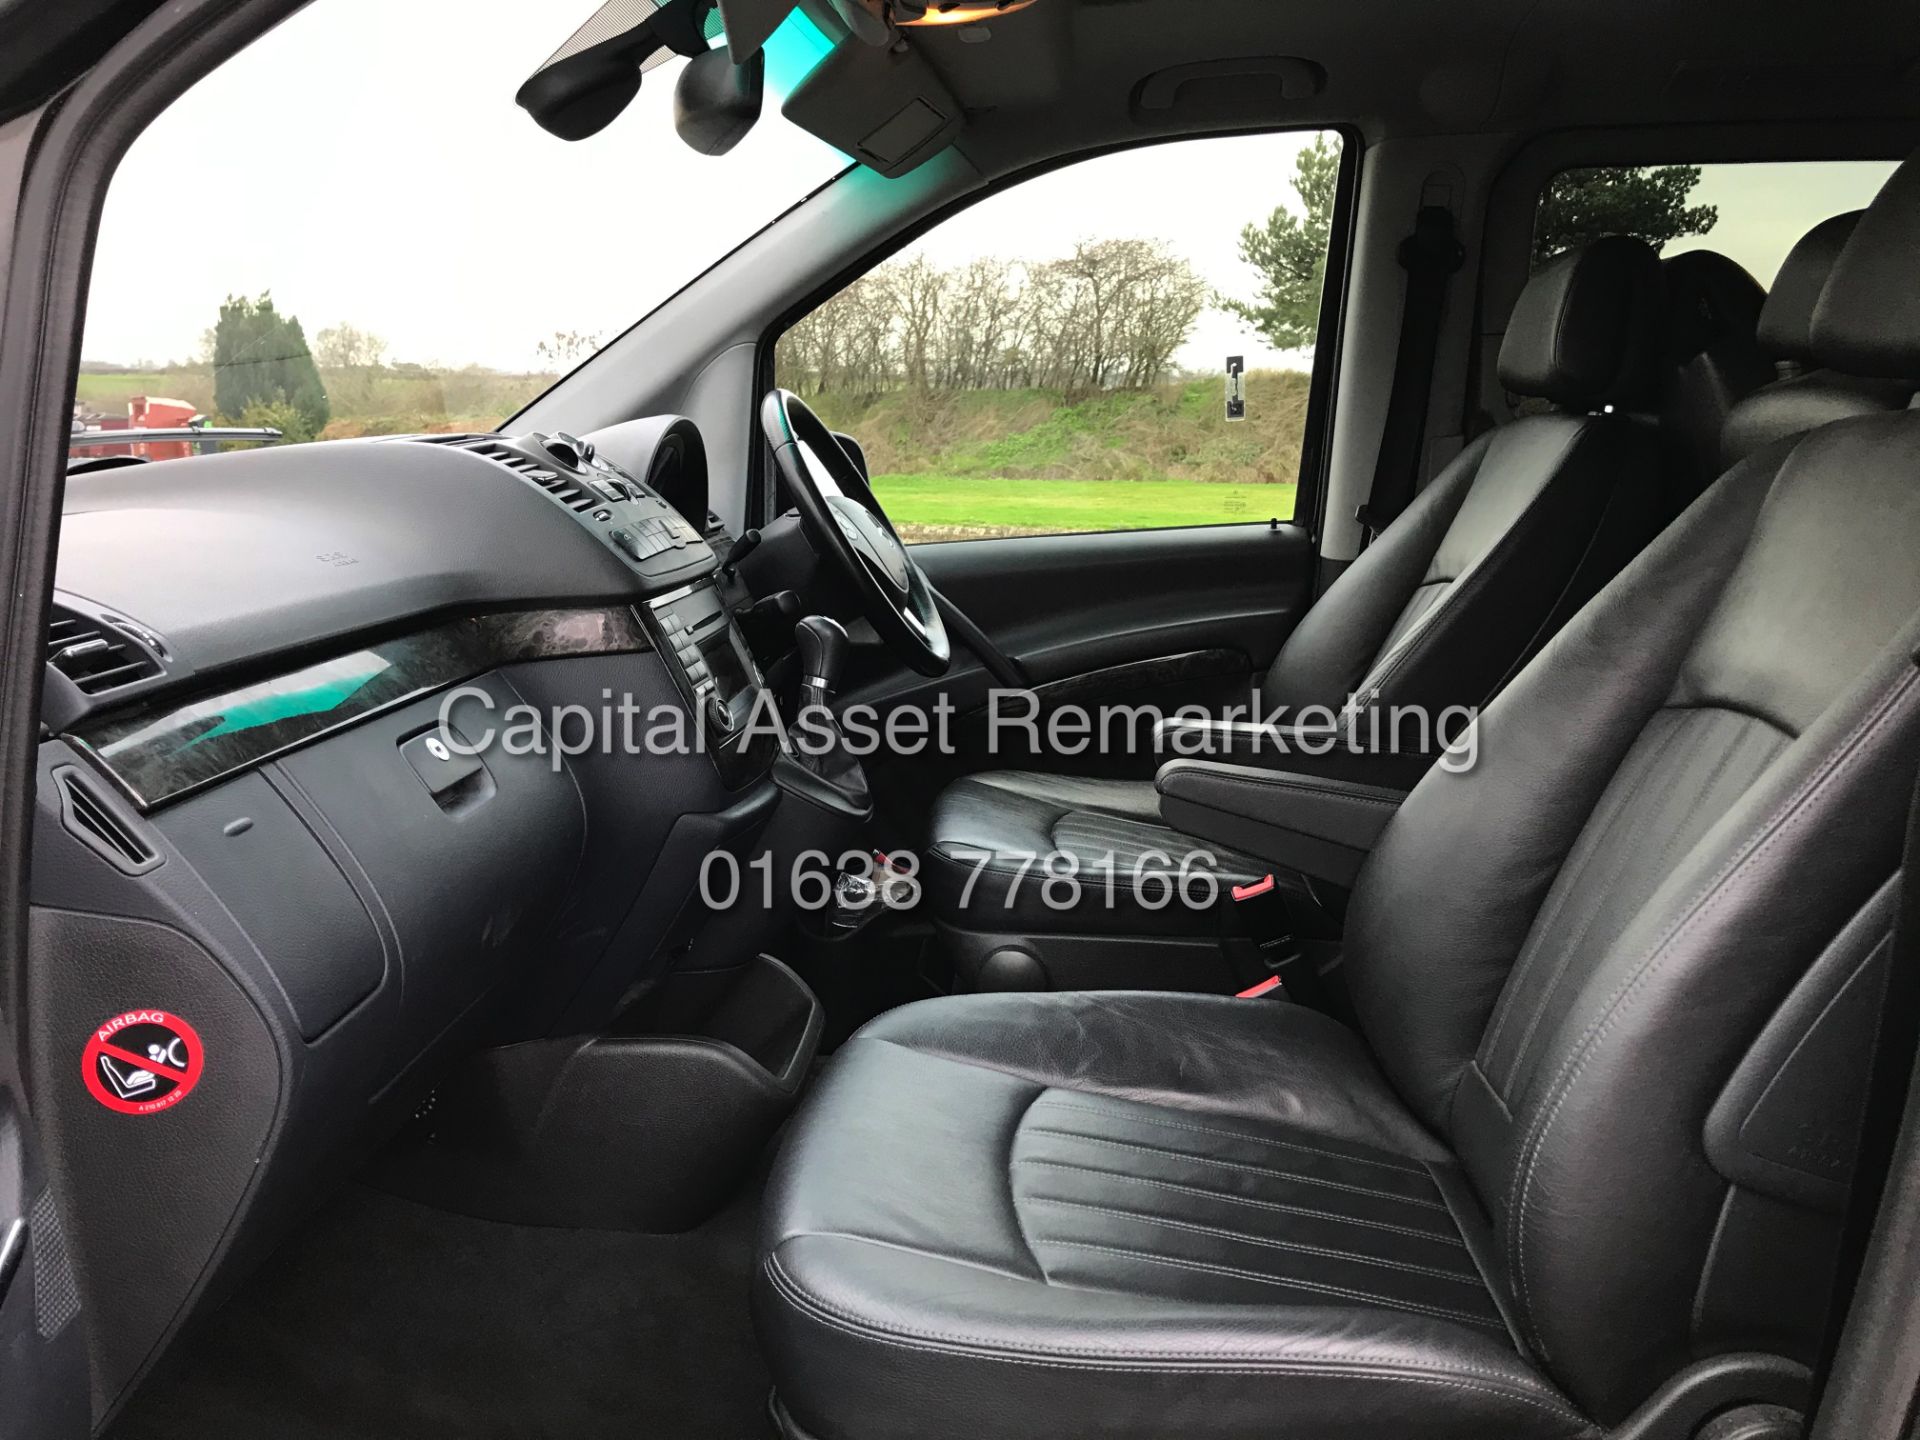 (ON SALE) MERCEDES VIANO 2.2CDI "AMBIENET" XLWB 8 SEATER (14 REG) 1 OWNER - FULLY LOADED - LEATHER - Image 13 of 28